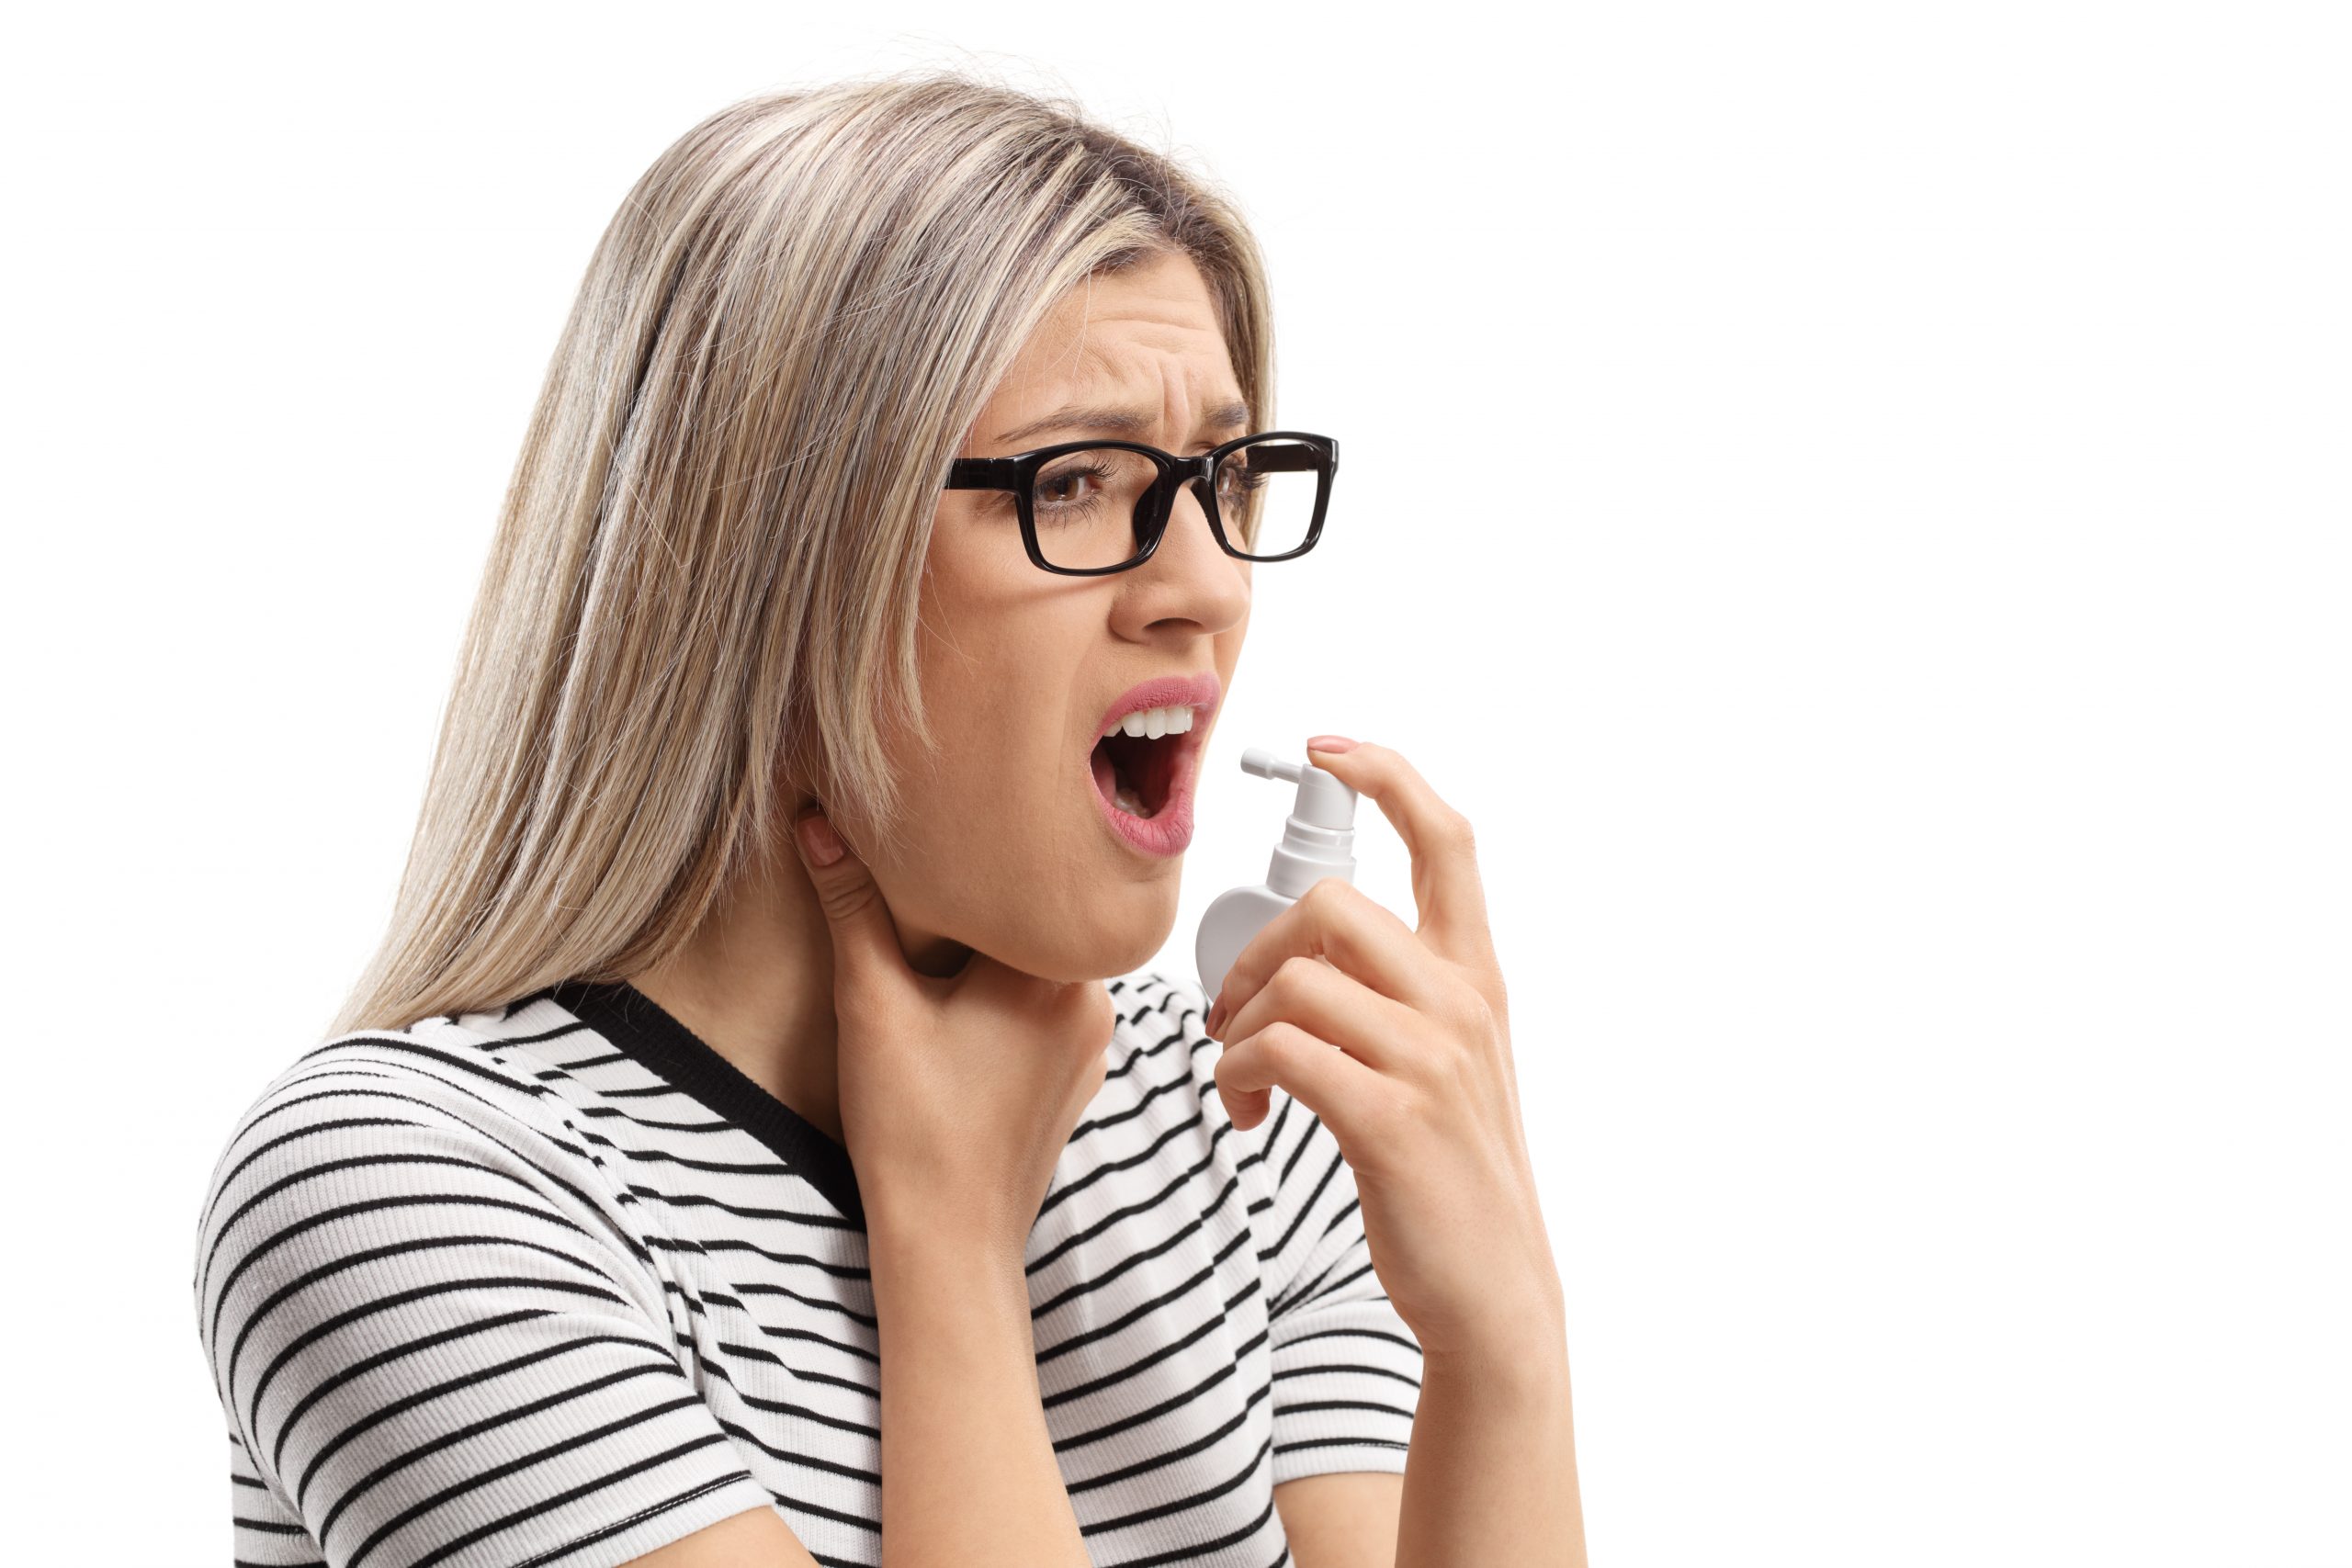 Symptoms of burning mouth syndrome